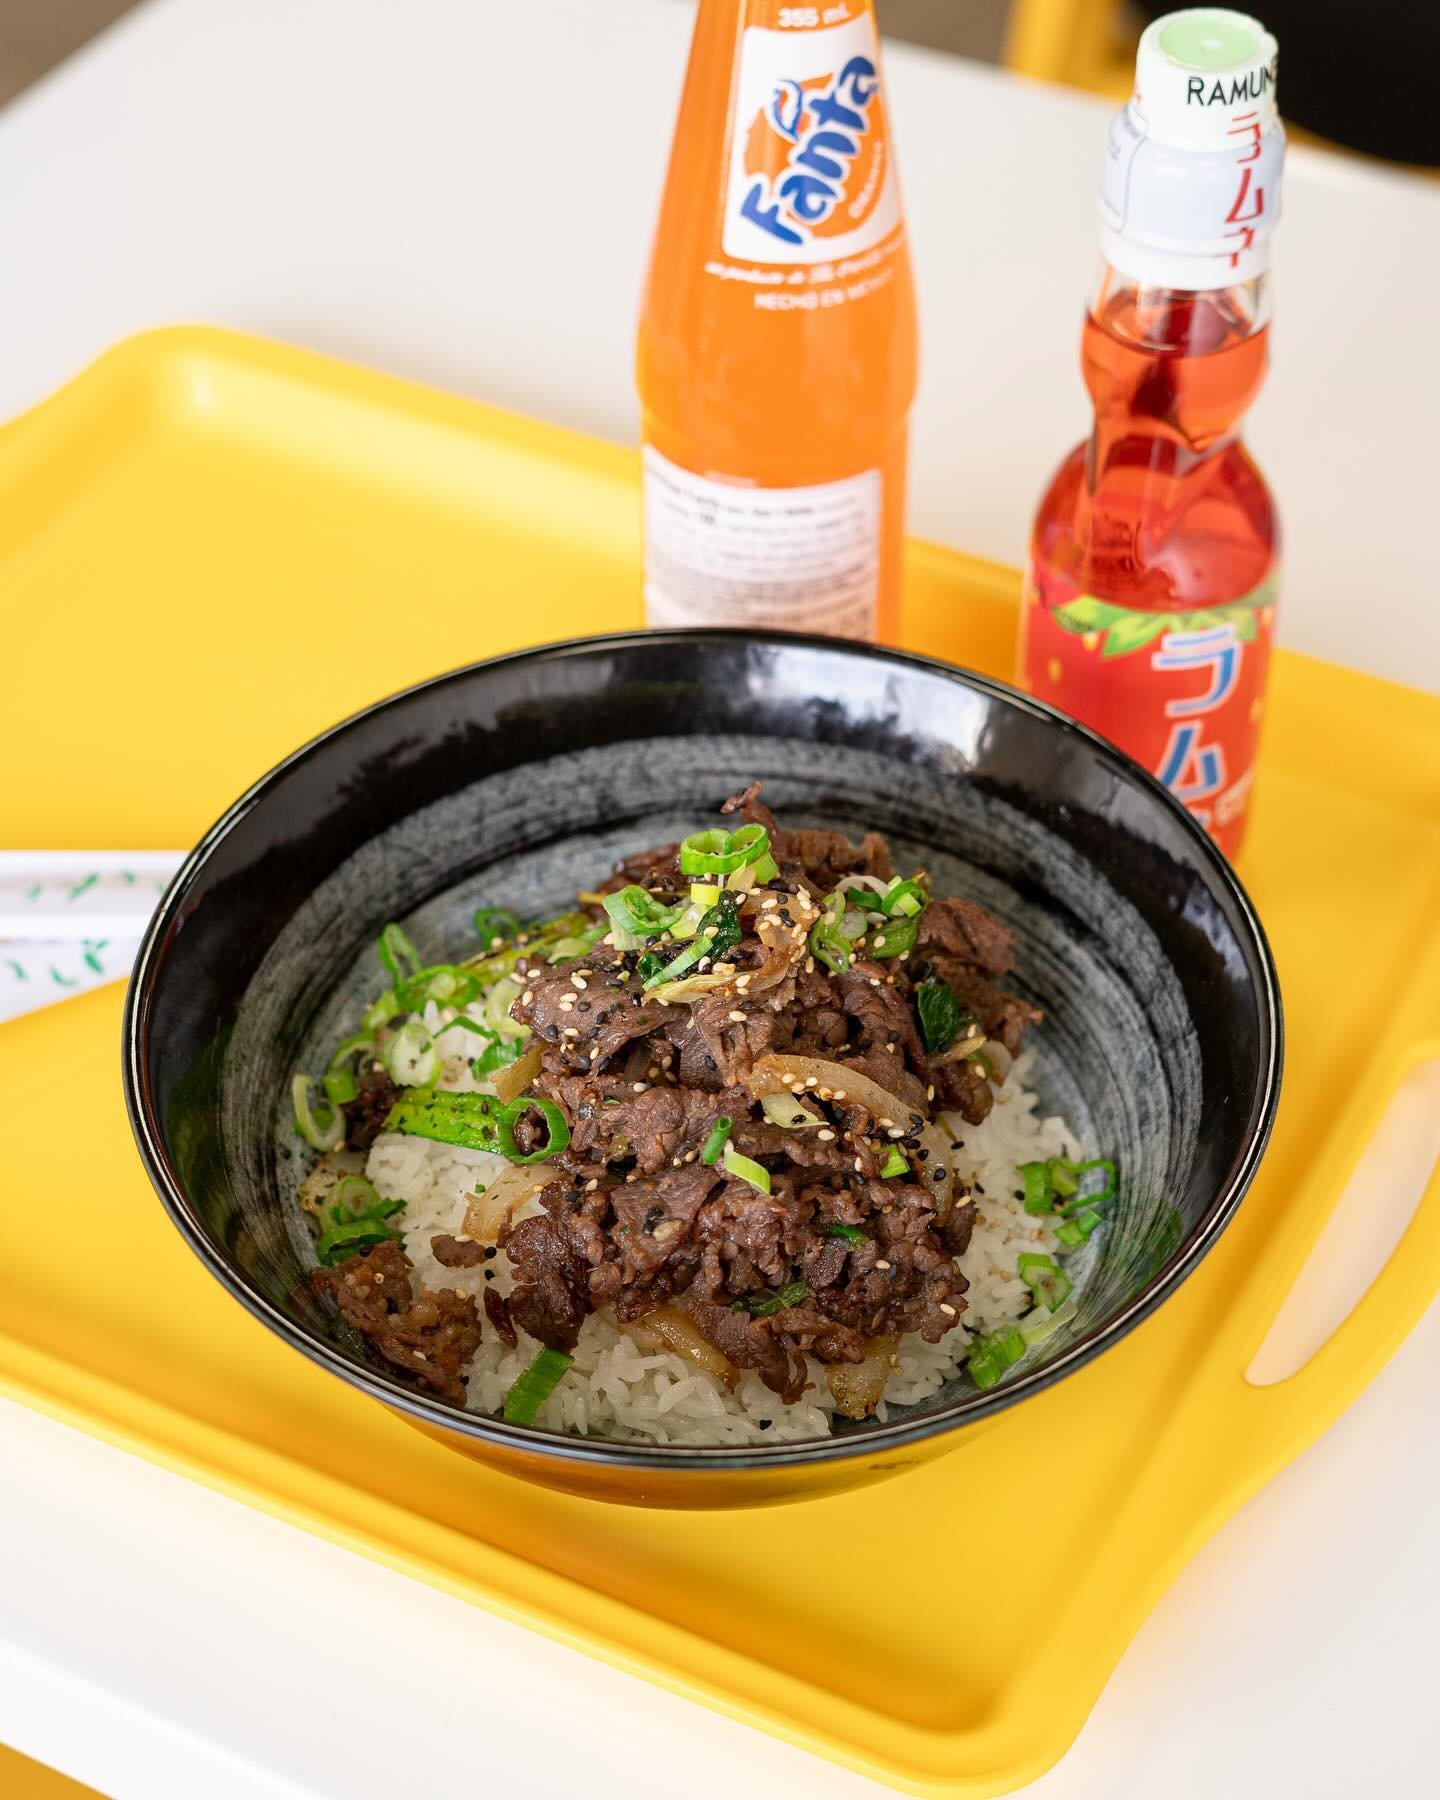 Lunch of champs with this Bulgogi BBQ Beef Bowl! Order now on musubisquare.com 🔥

📍2626 W La Palma Ave, Anaheim, CA
⏰ 10A-8:30P
#musubisquare